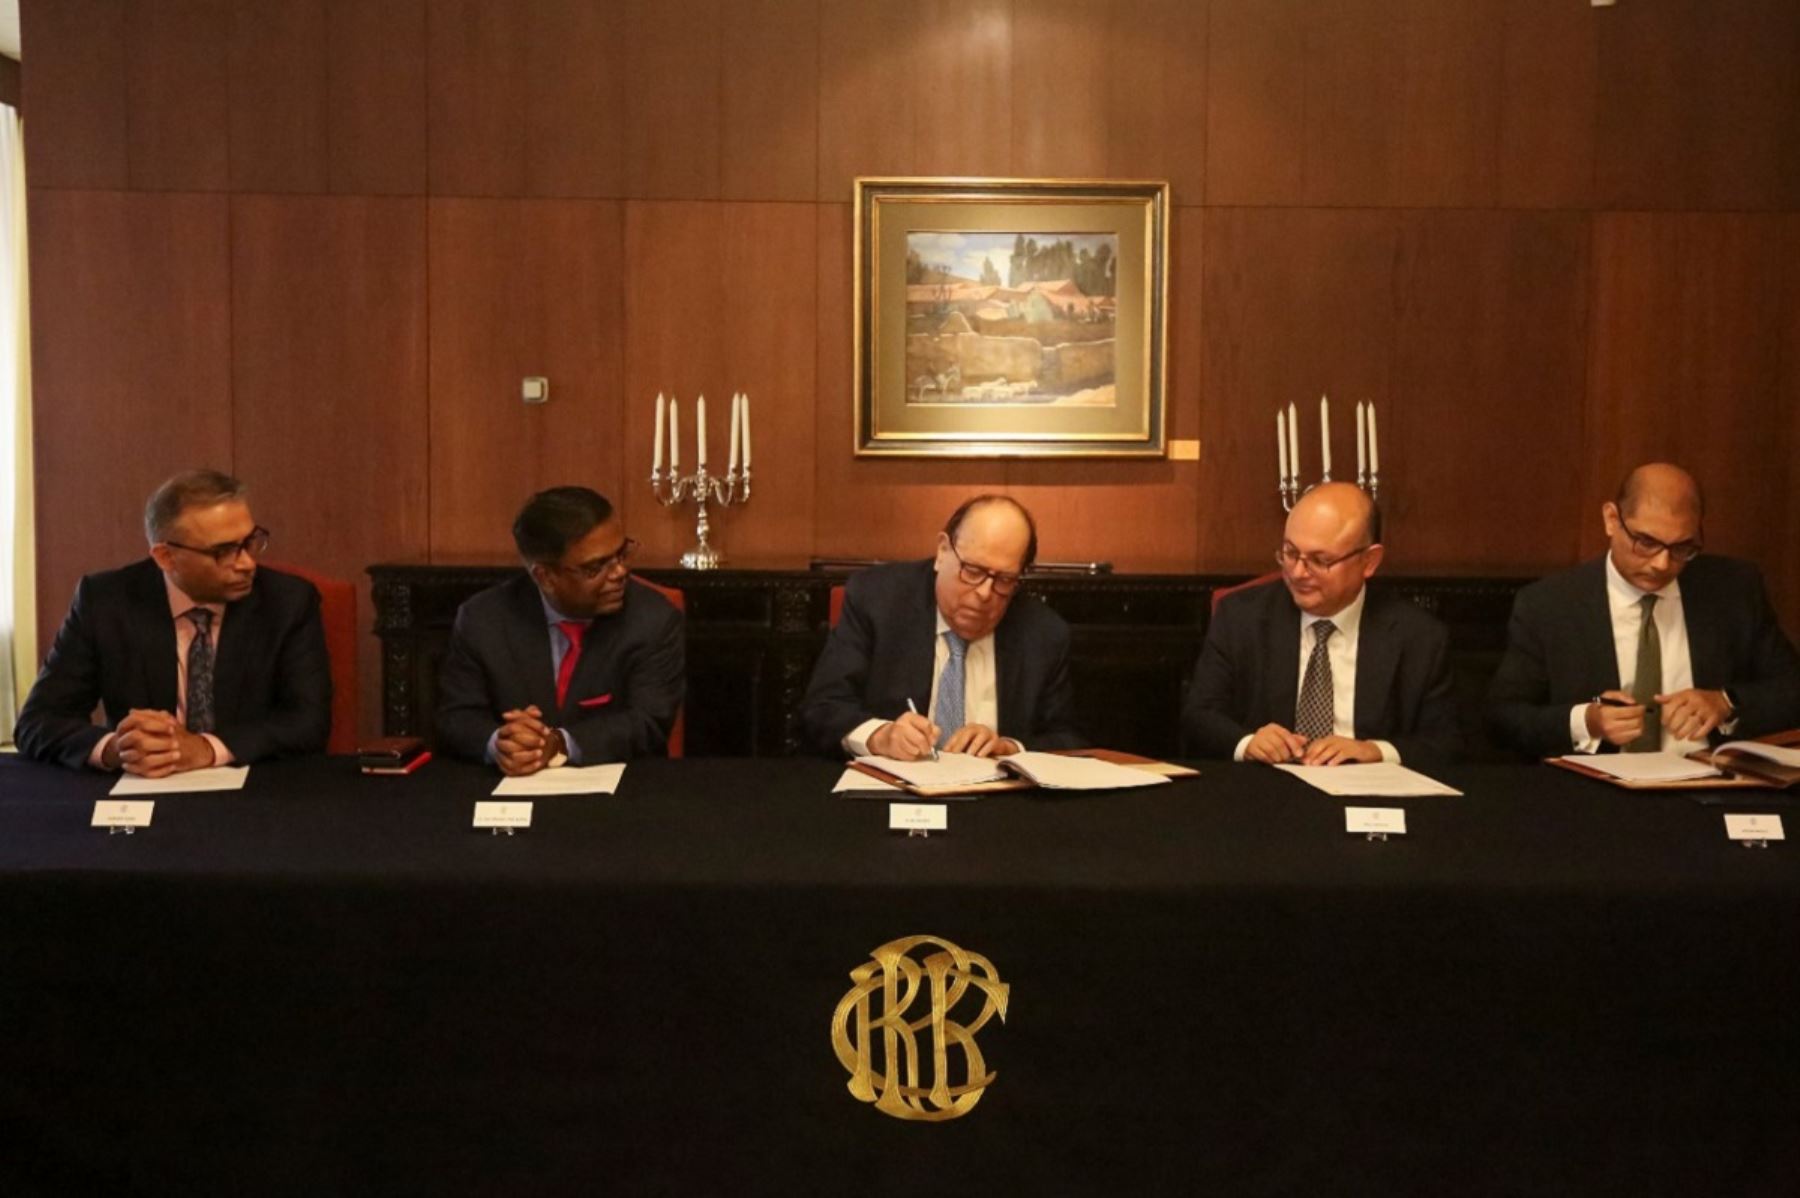 Photo: Courtesy of Central Reserve Bank of Peru